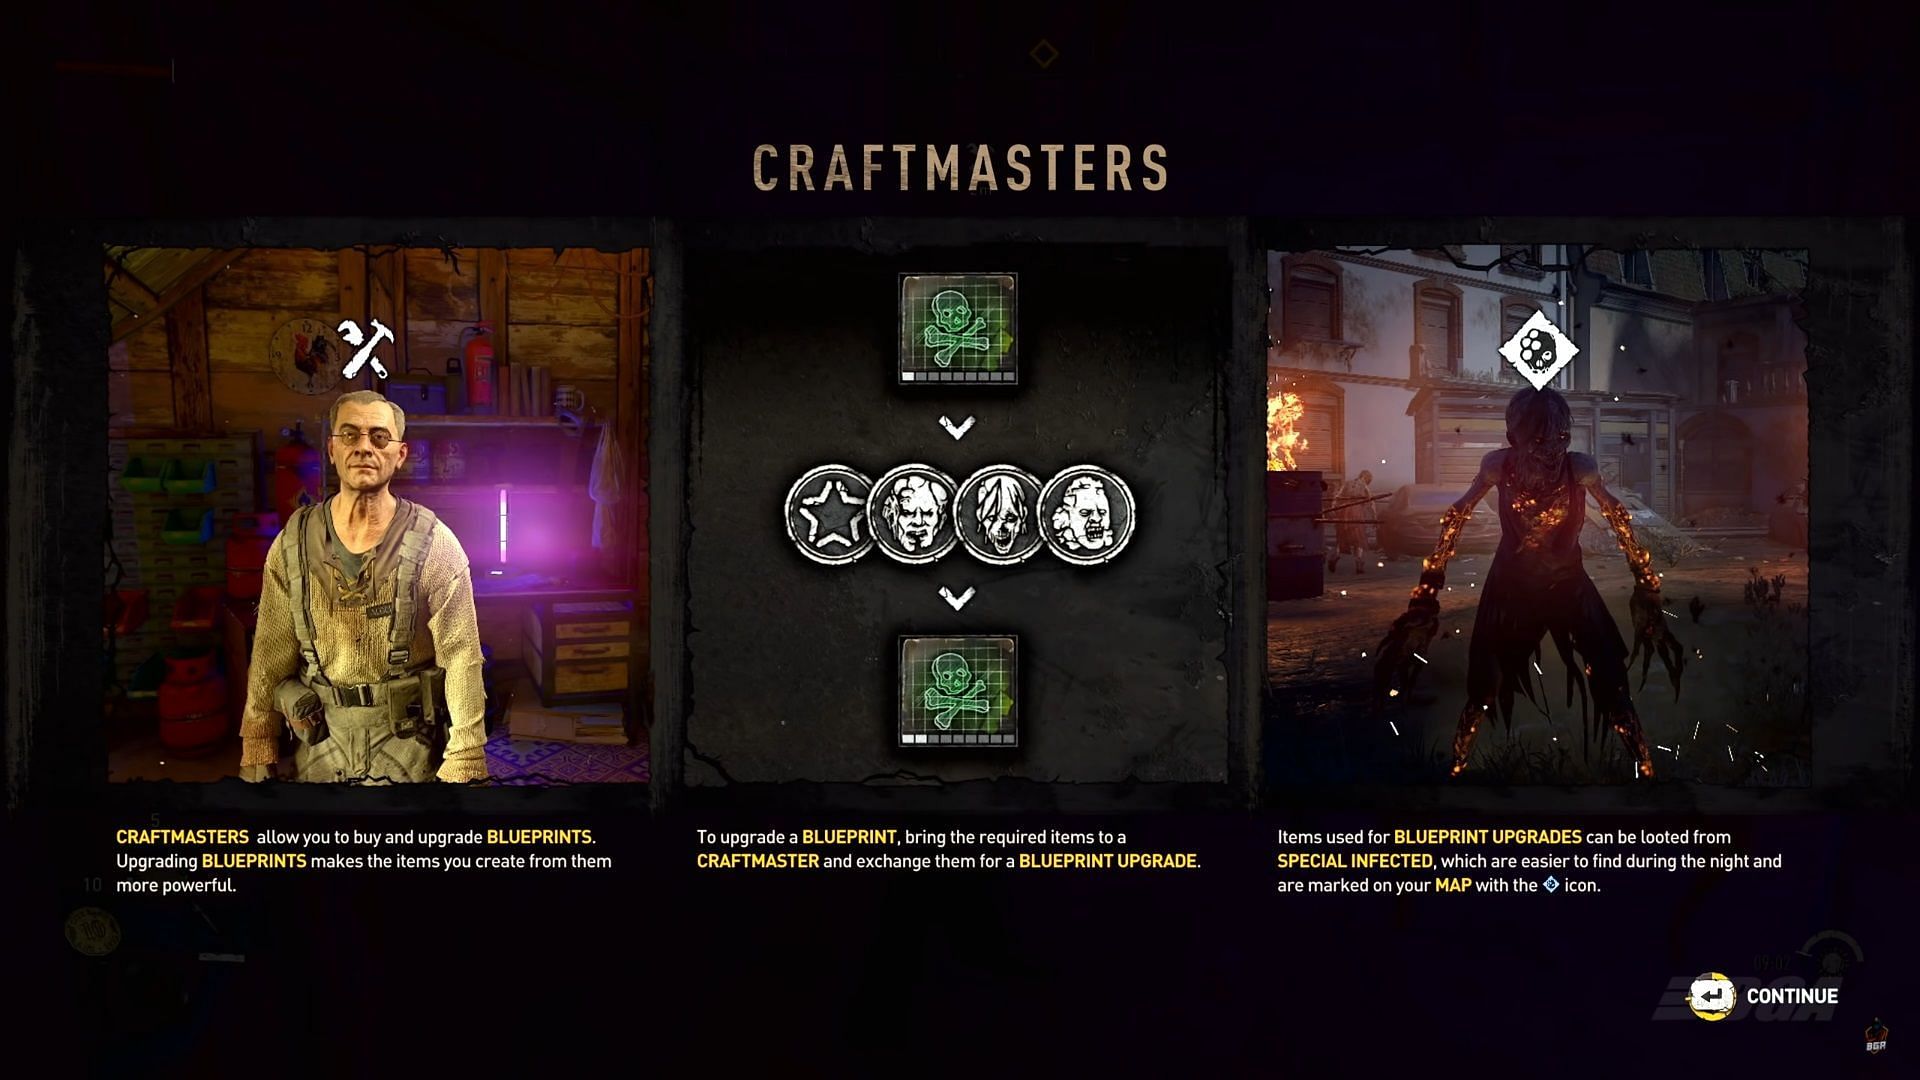 Dying Light 2 explains what players can get from the Craftsmaster (Image via Techland)